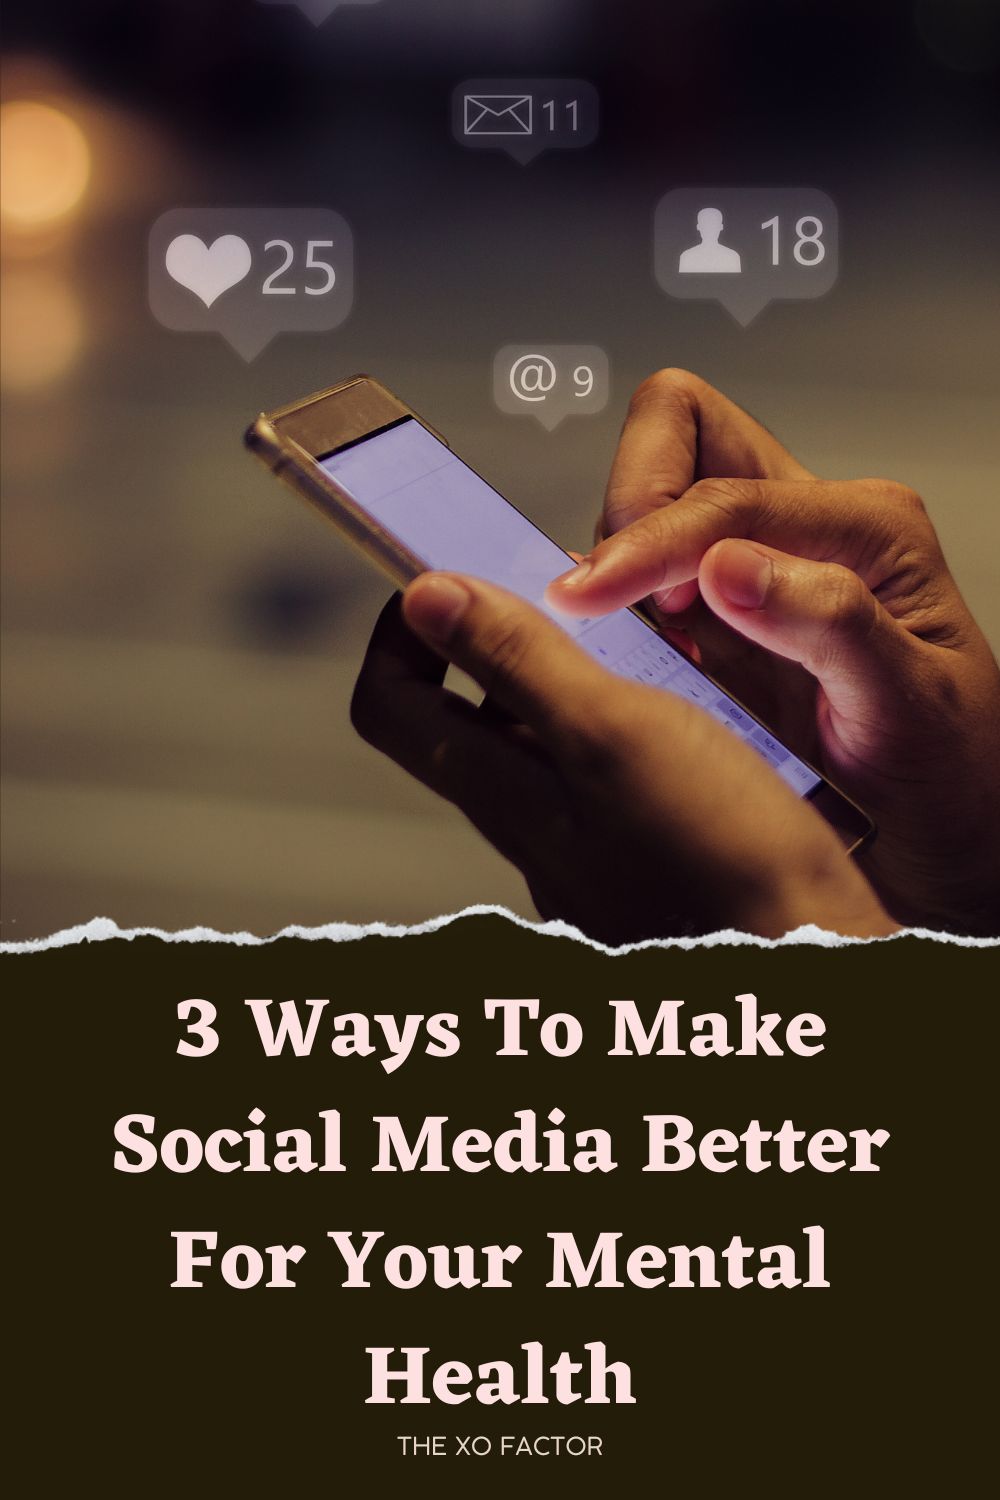 3 Ways To Make Social Media Better For Your Mental Health